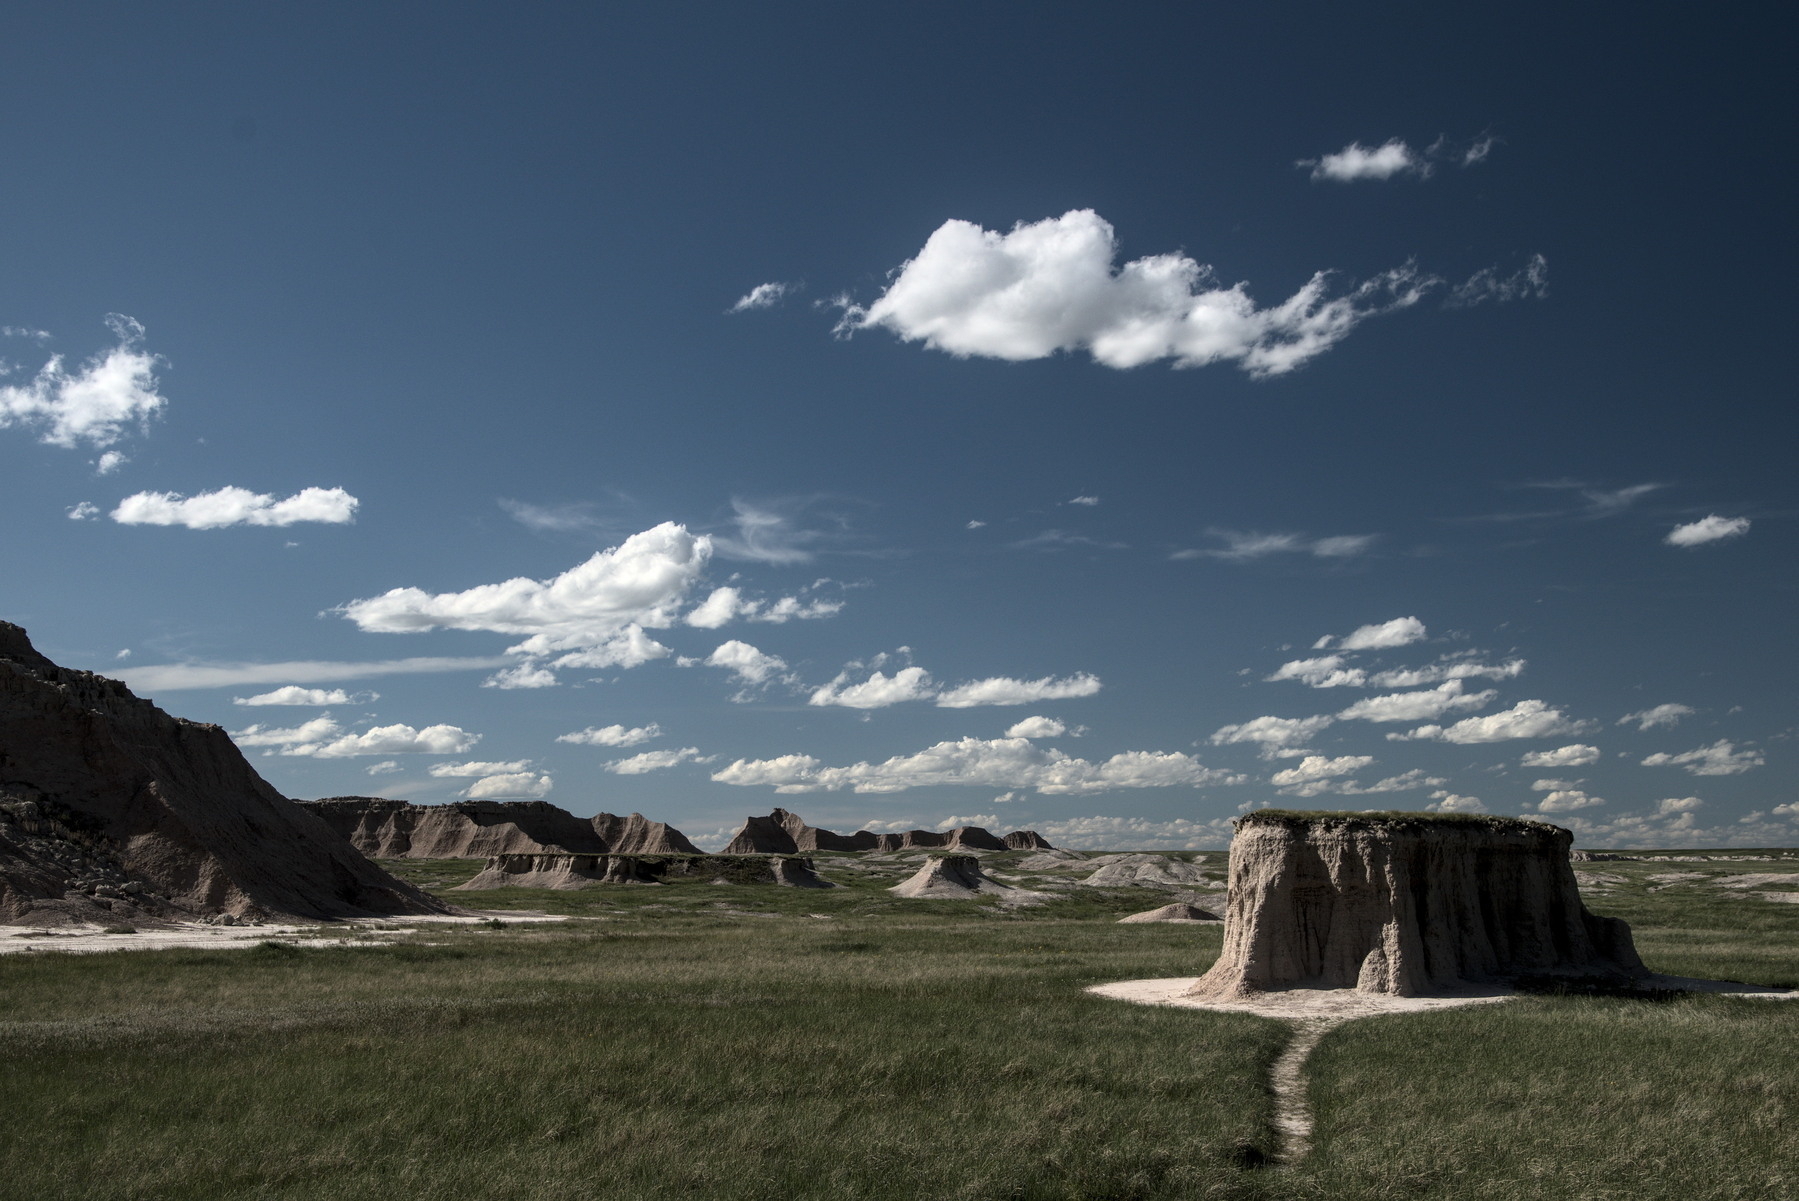 Grasslands interrupted by eroding towers and mesas of soft rock. 